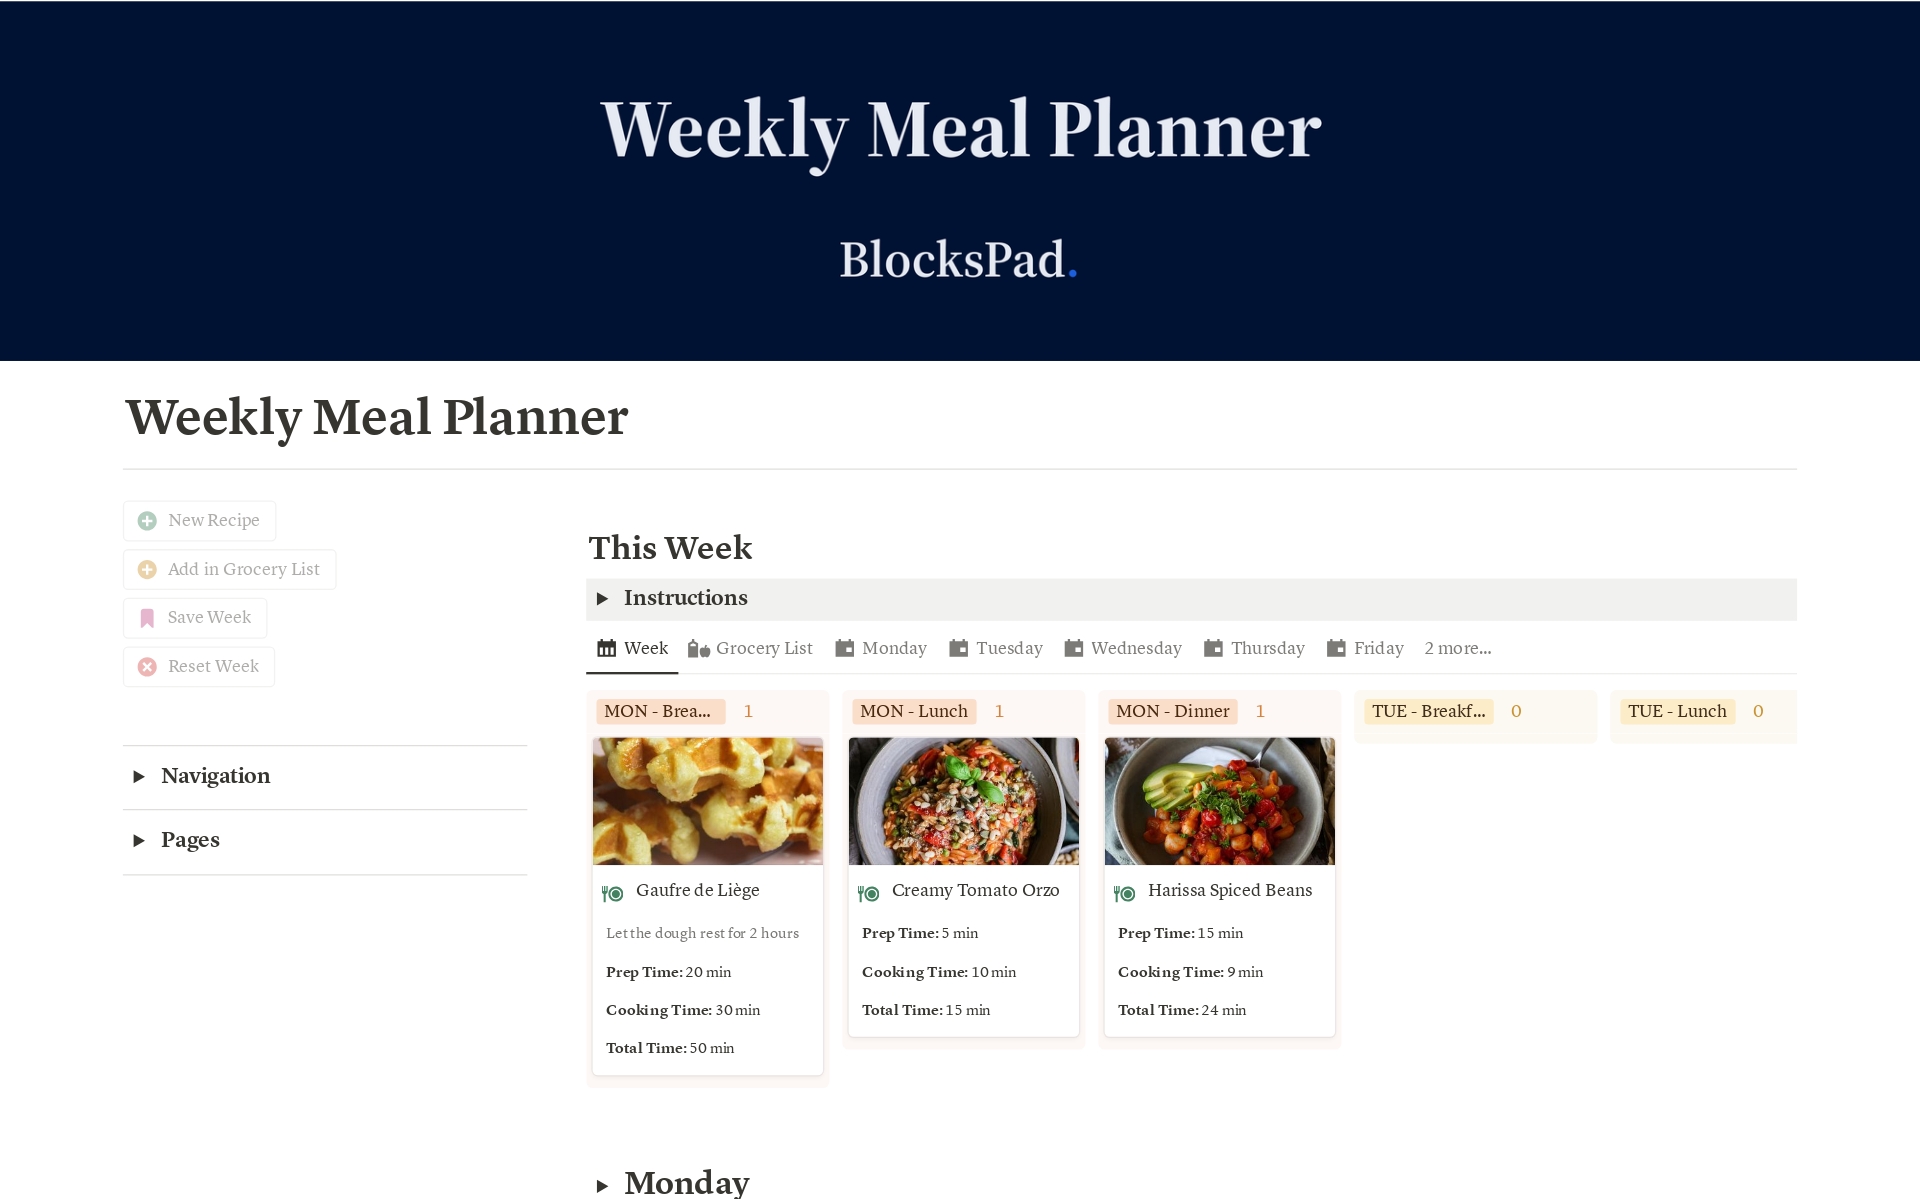 Eat better and save time and money by planning your week’s meals in just a few minutes. It's very easy to use, even for Notion newbies, thanks to its drag-and-drop planning feature.